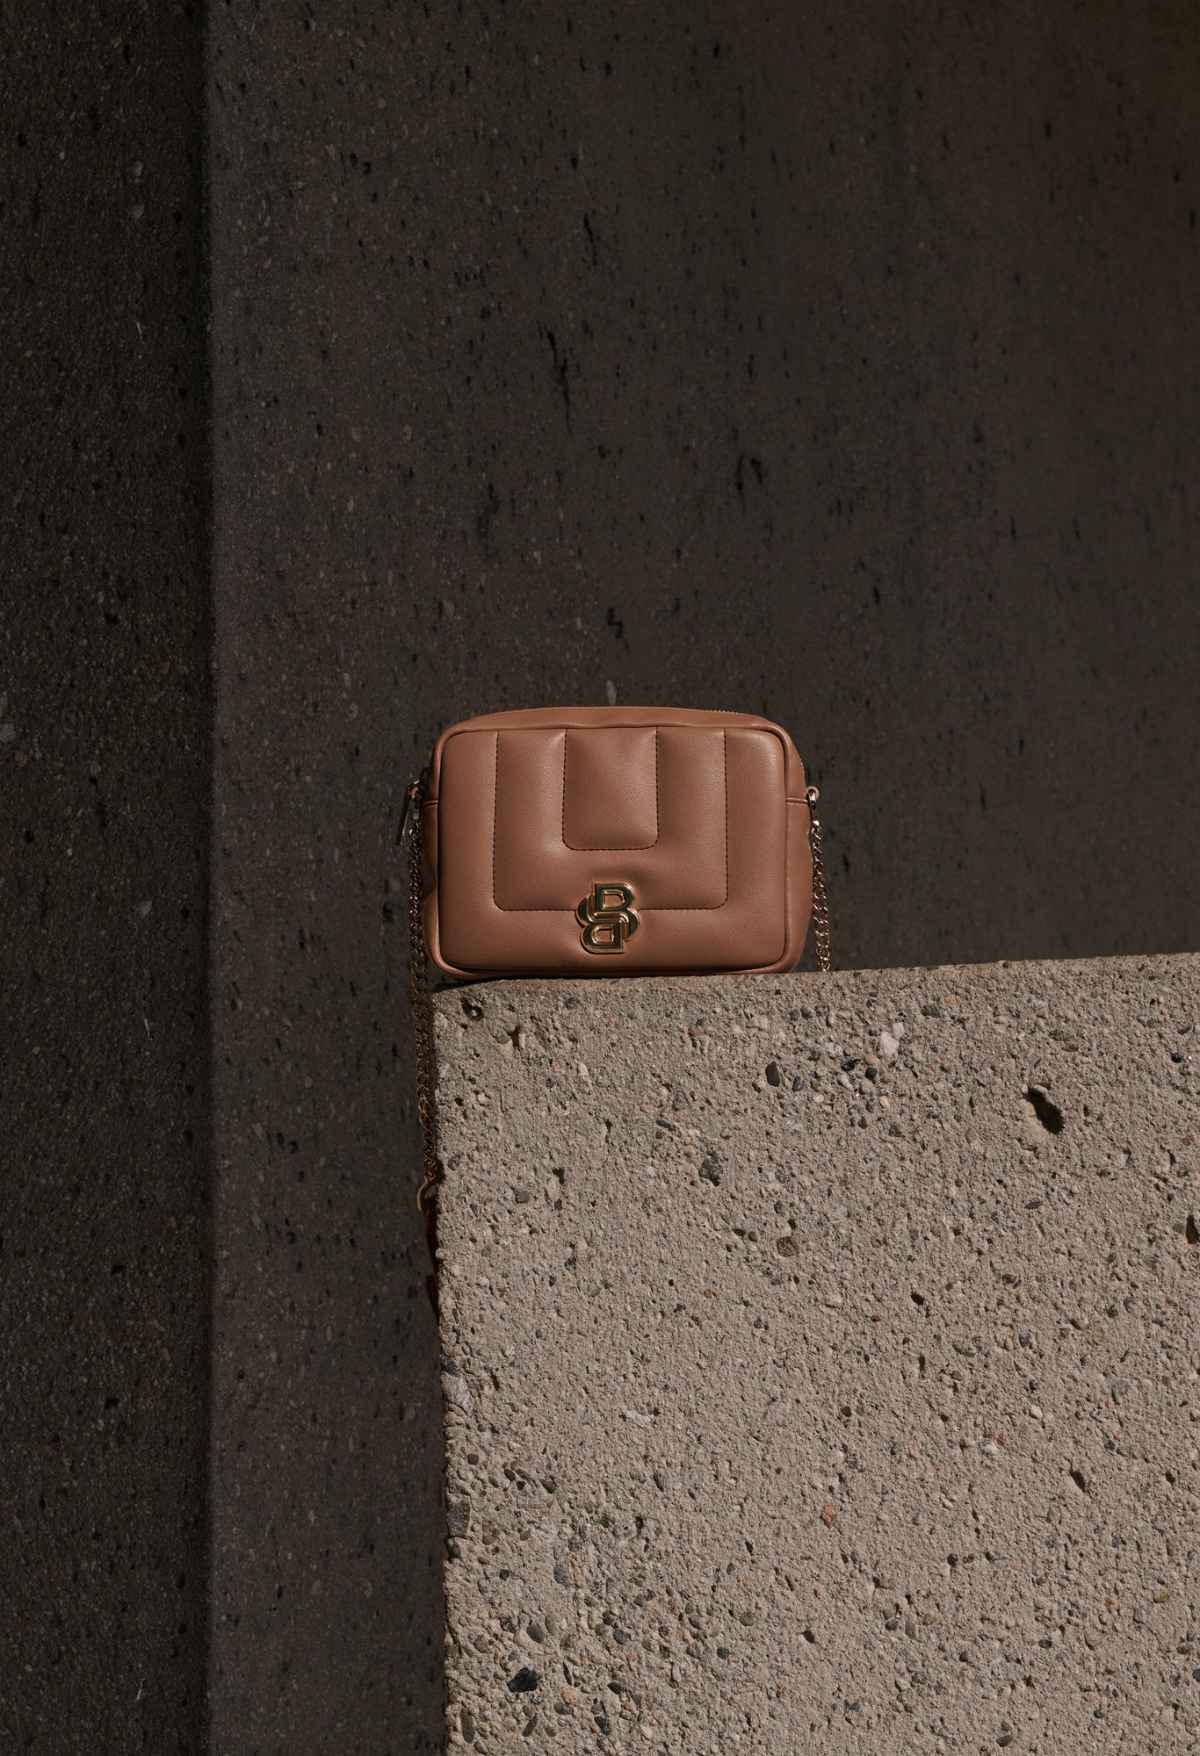 Unlock The Power Within And Make A Statement With The New Double B Monogram